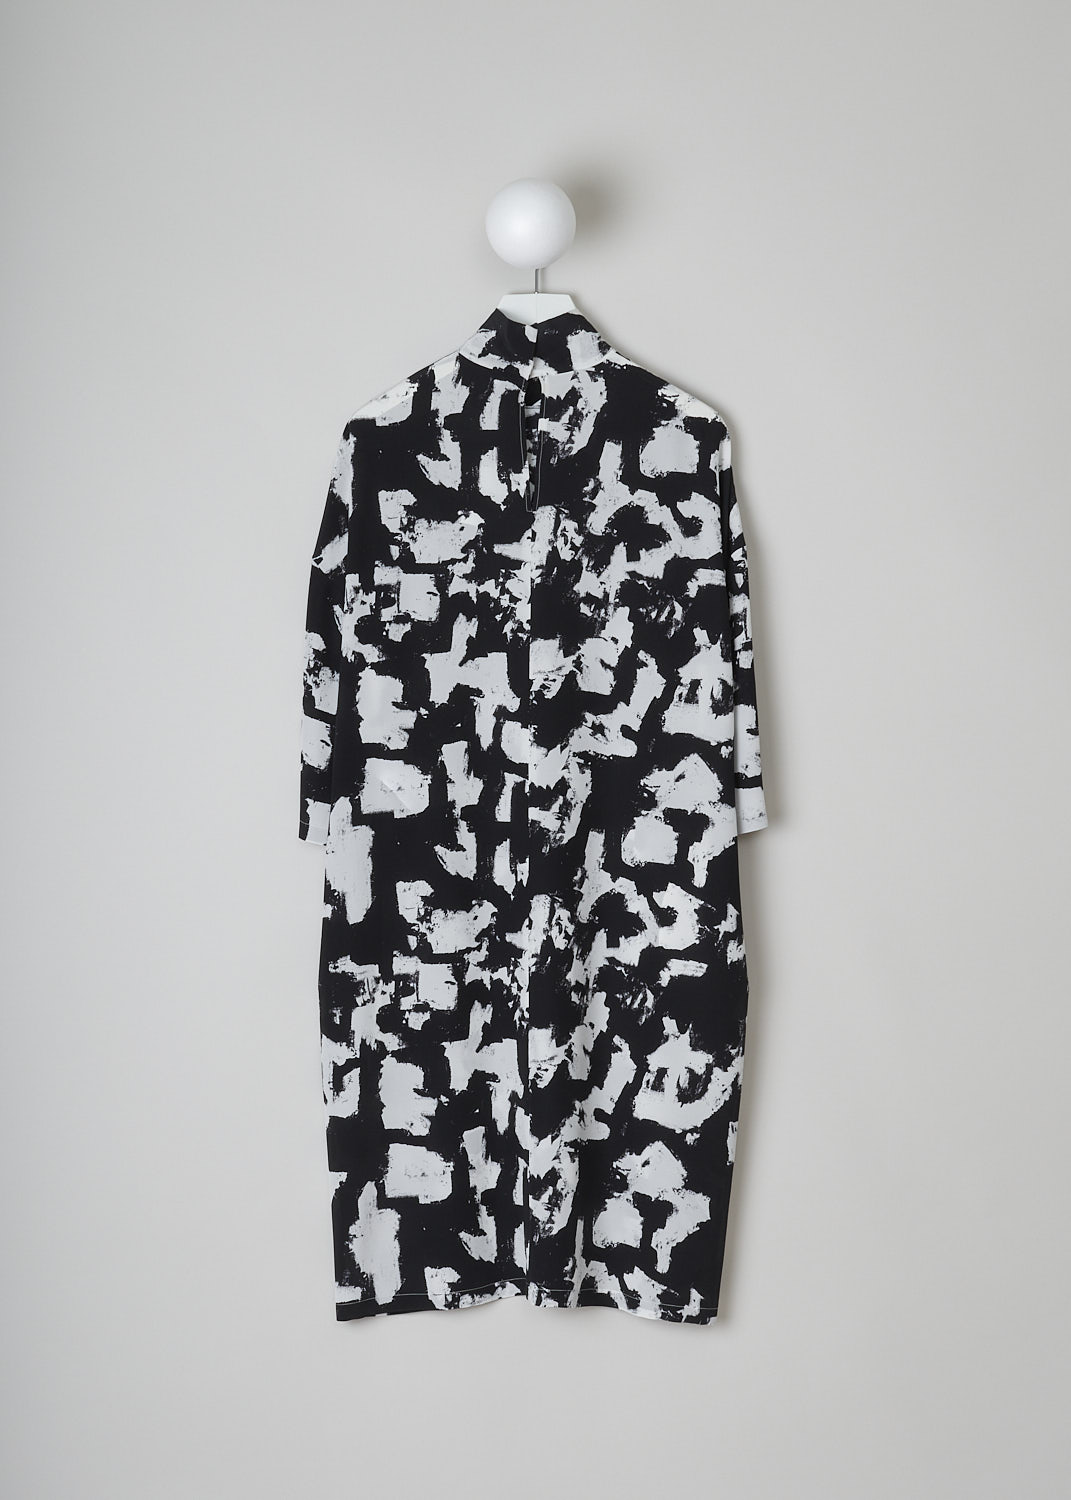 ASPESI, BLACK AND WHITE MIDI DRESS, 2992_V126_62241, Black, White, Print, Back, This black and white printed midi dress has a high-neck with an incorporated tie detail. The dress has dropped shoulders with three-quarter sleeves. Concealed slanted pockets can be found on-seam. The dress has a straight hemline.
